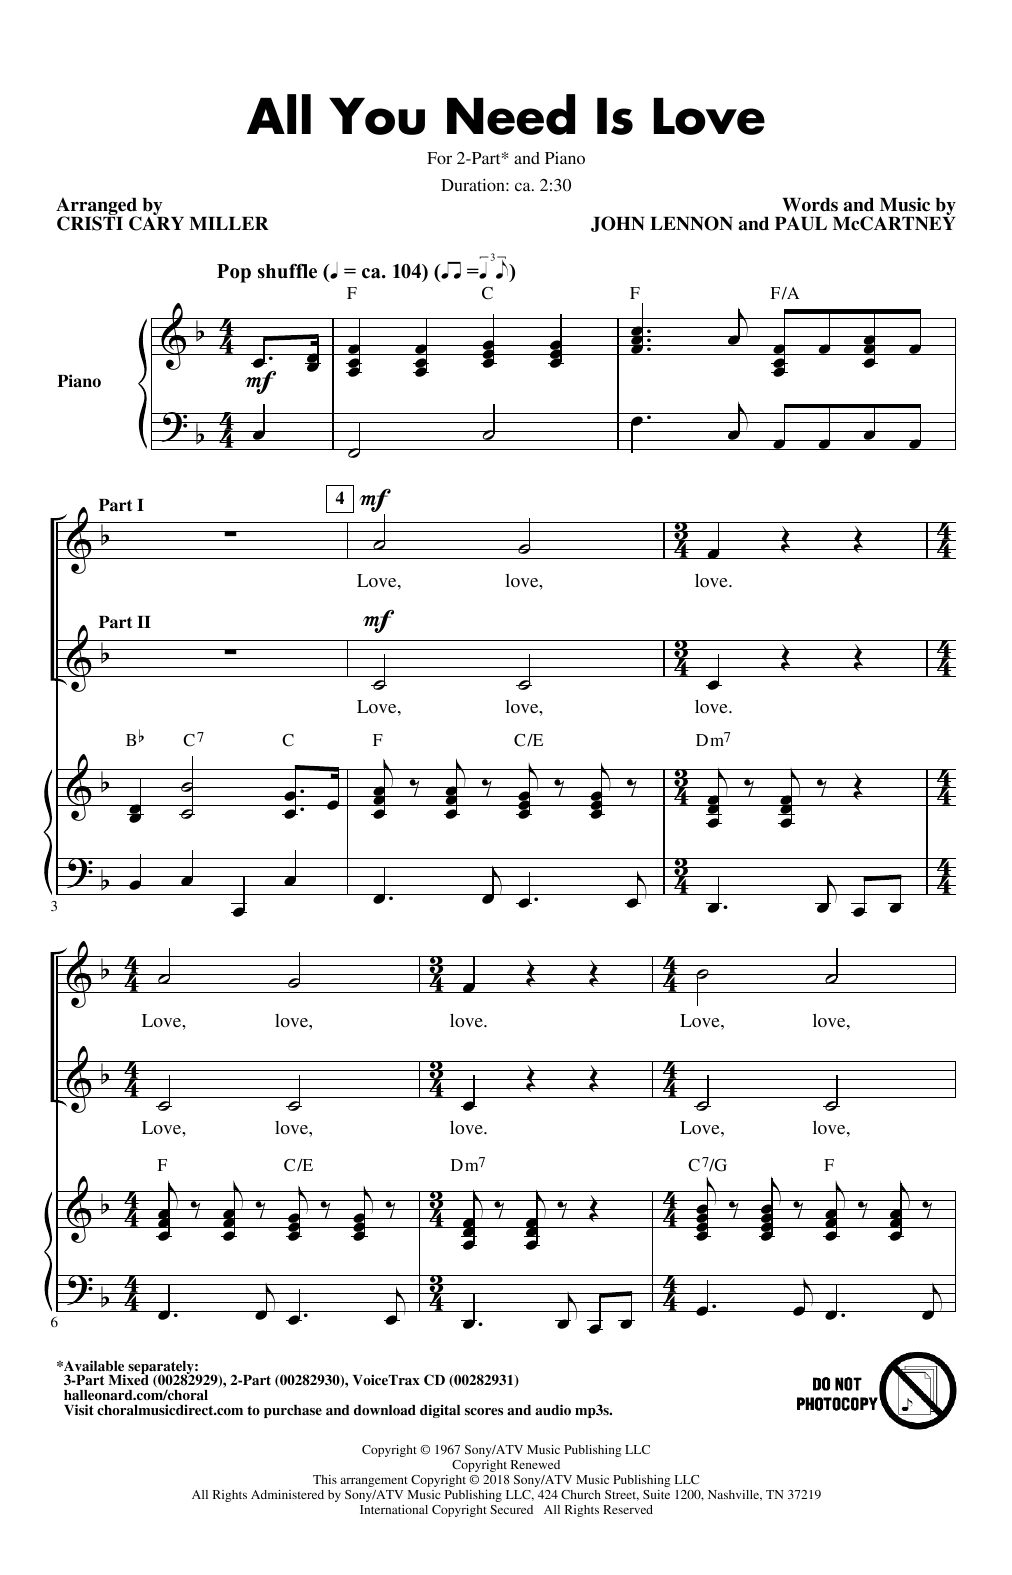 Download The Beatles All You Need Is Love (arr. Cristi Cari Sheet Music